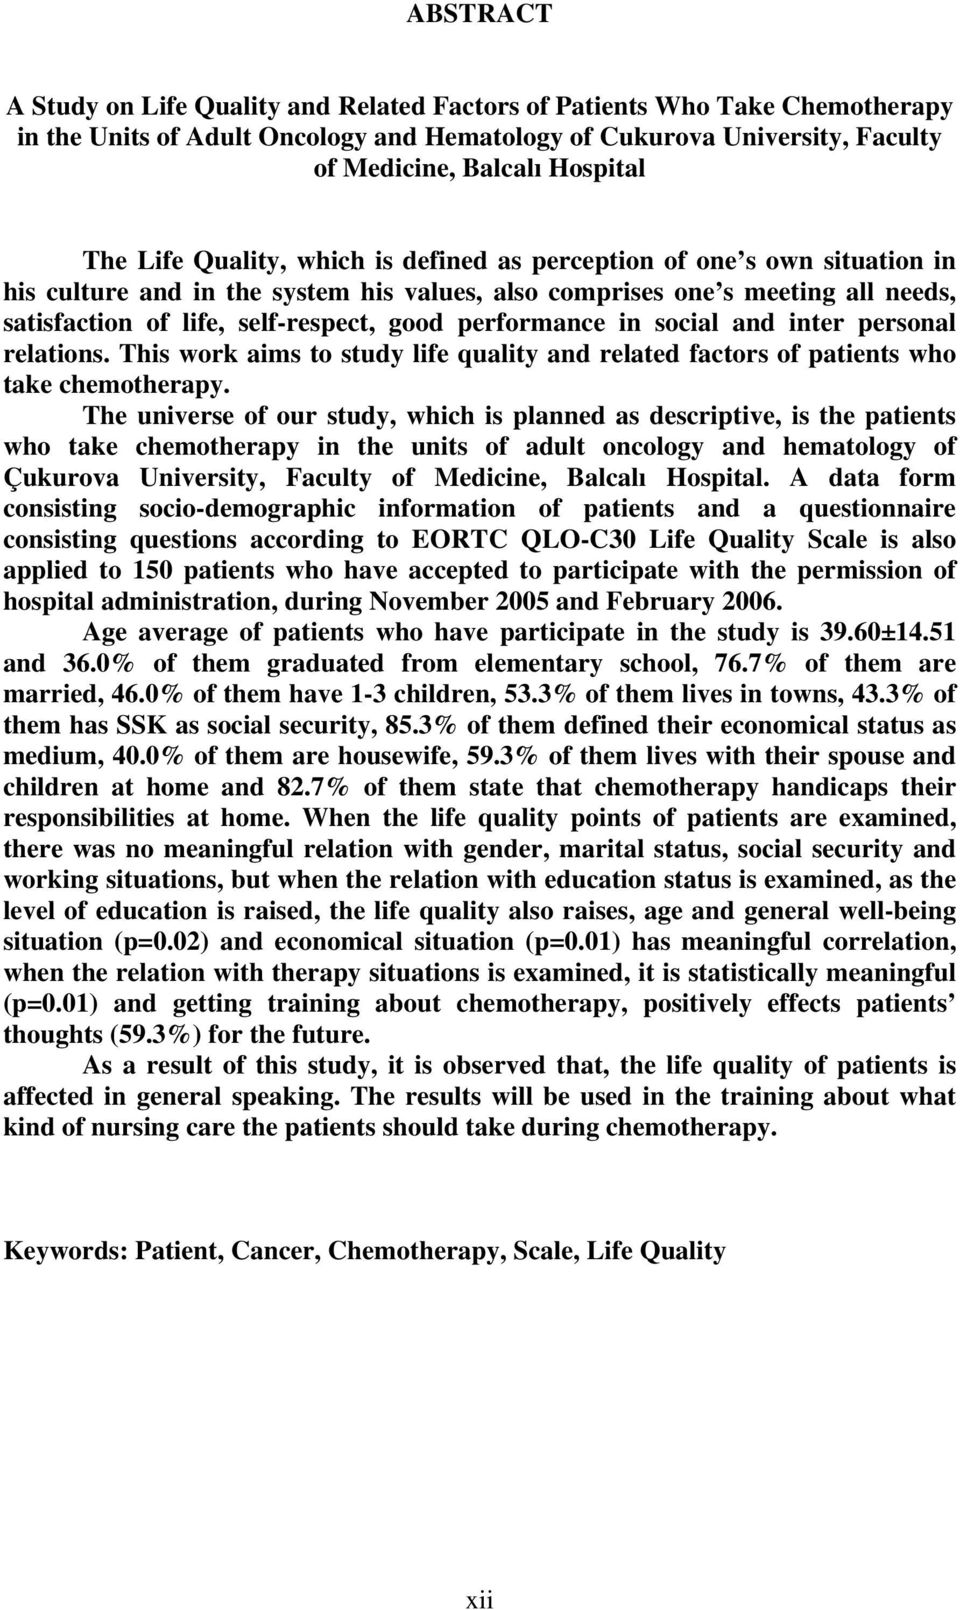 performance in social and inter personal relations. This work aims to study life quality and related factors of patients who take chemotherapy.